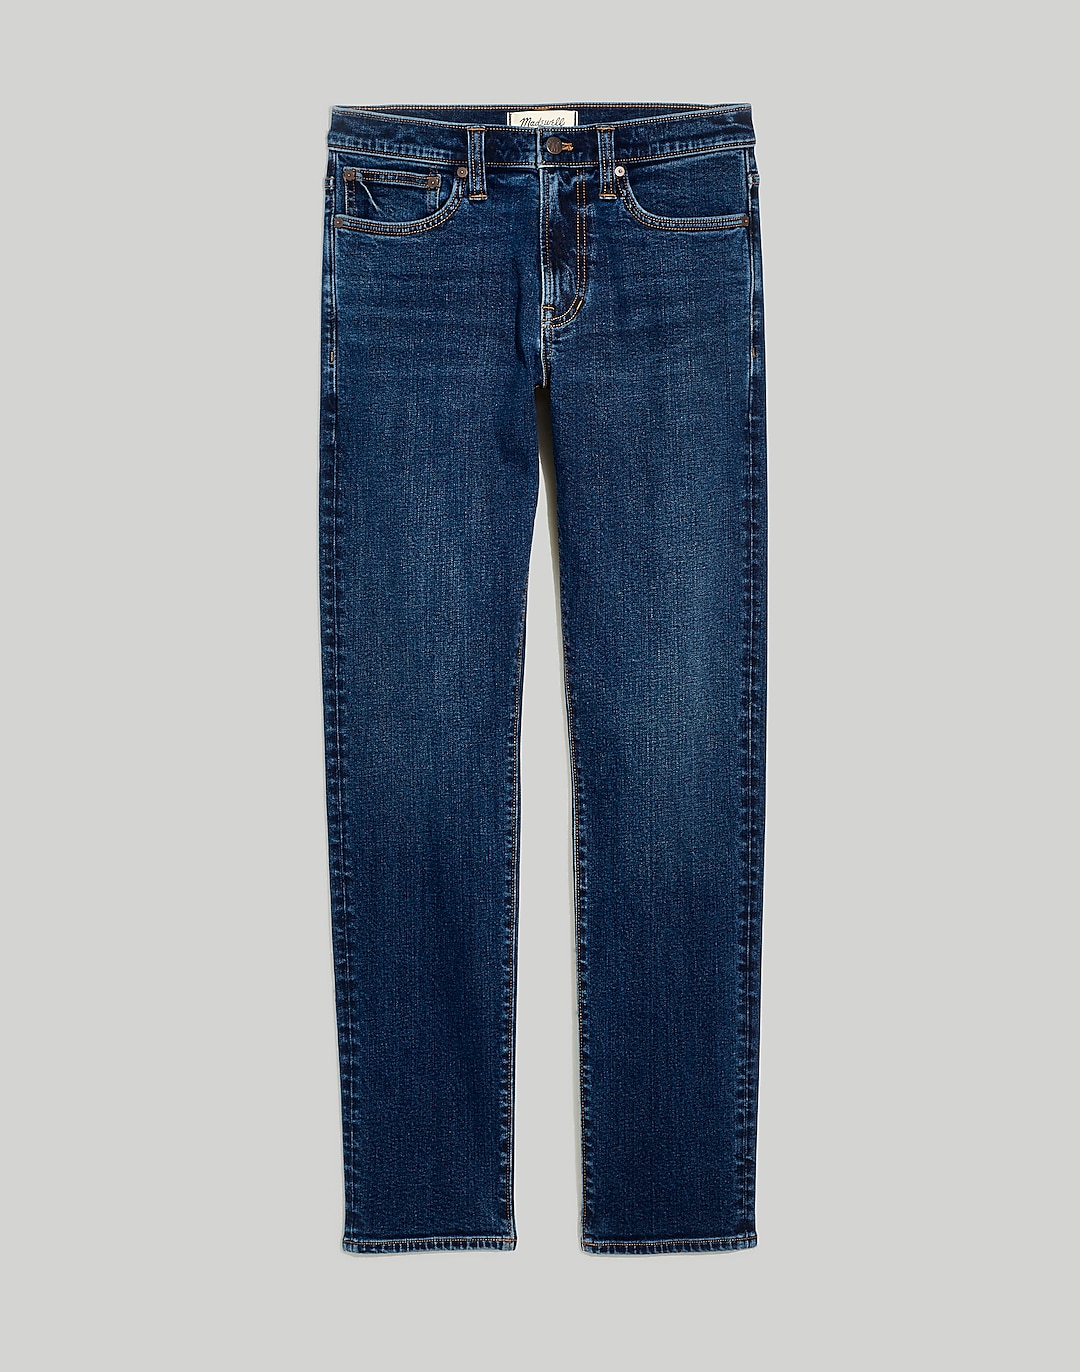 Milford Instacozy Slim Jeans in Edition Wash: